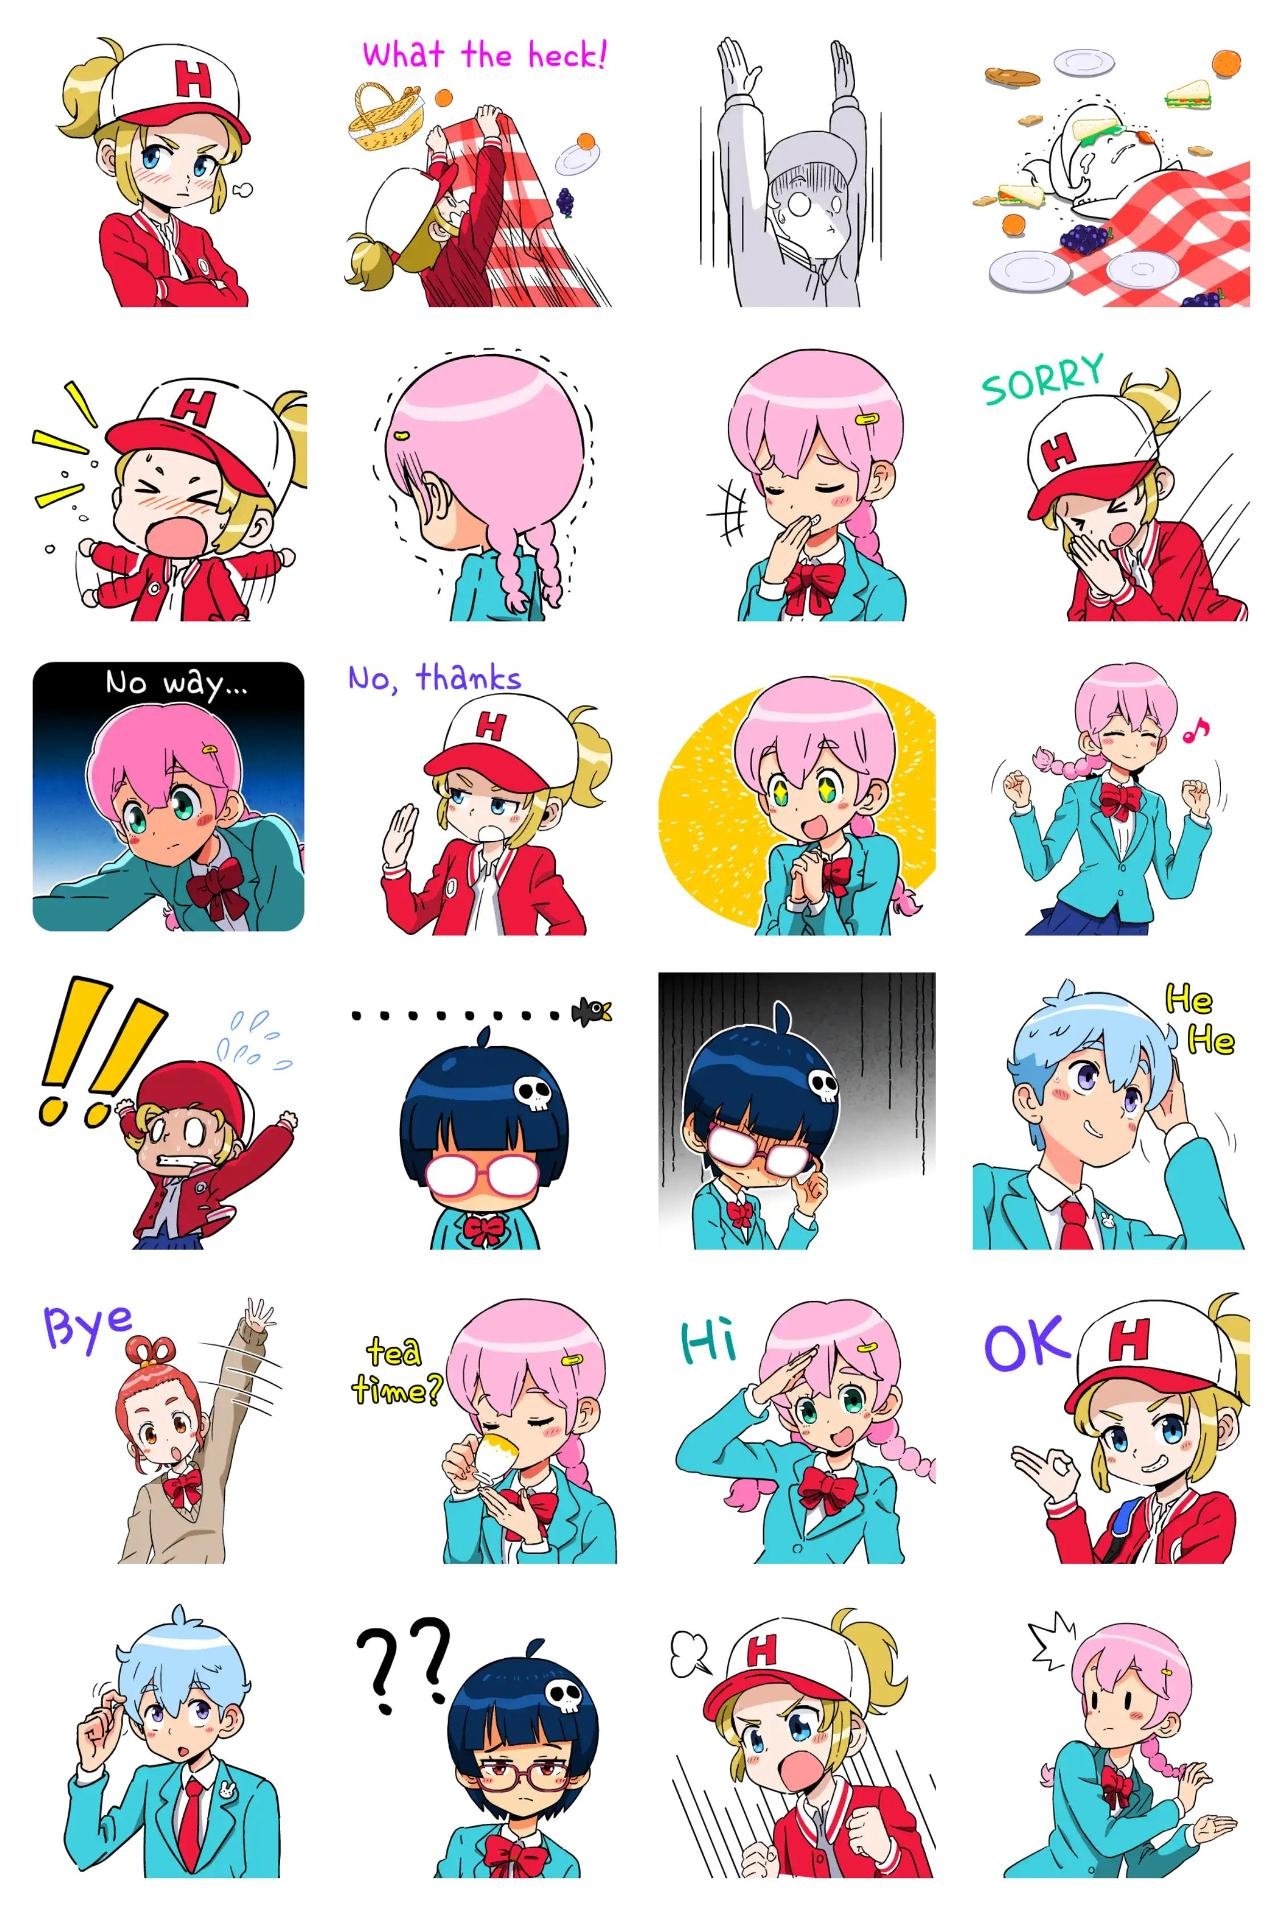 Softy Girl & Friends Animation/Cartoon,Gag sticker pack for Whatsapp, Telegram, Signal, and others chatting and message apps